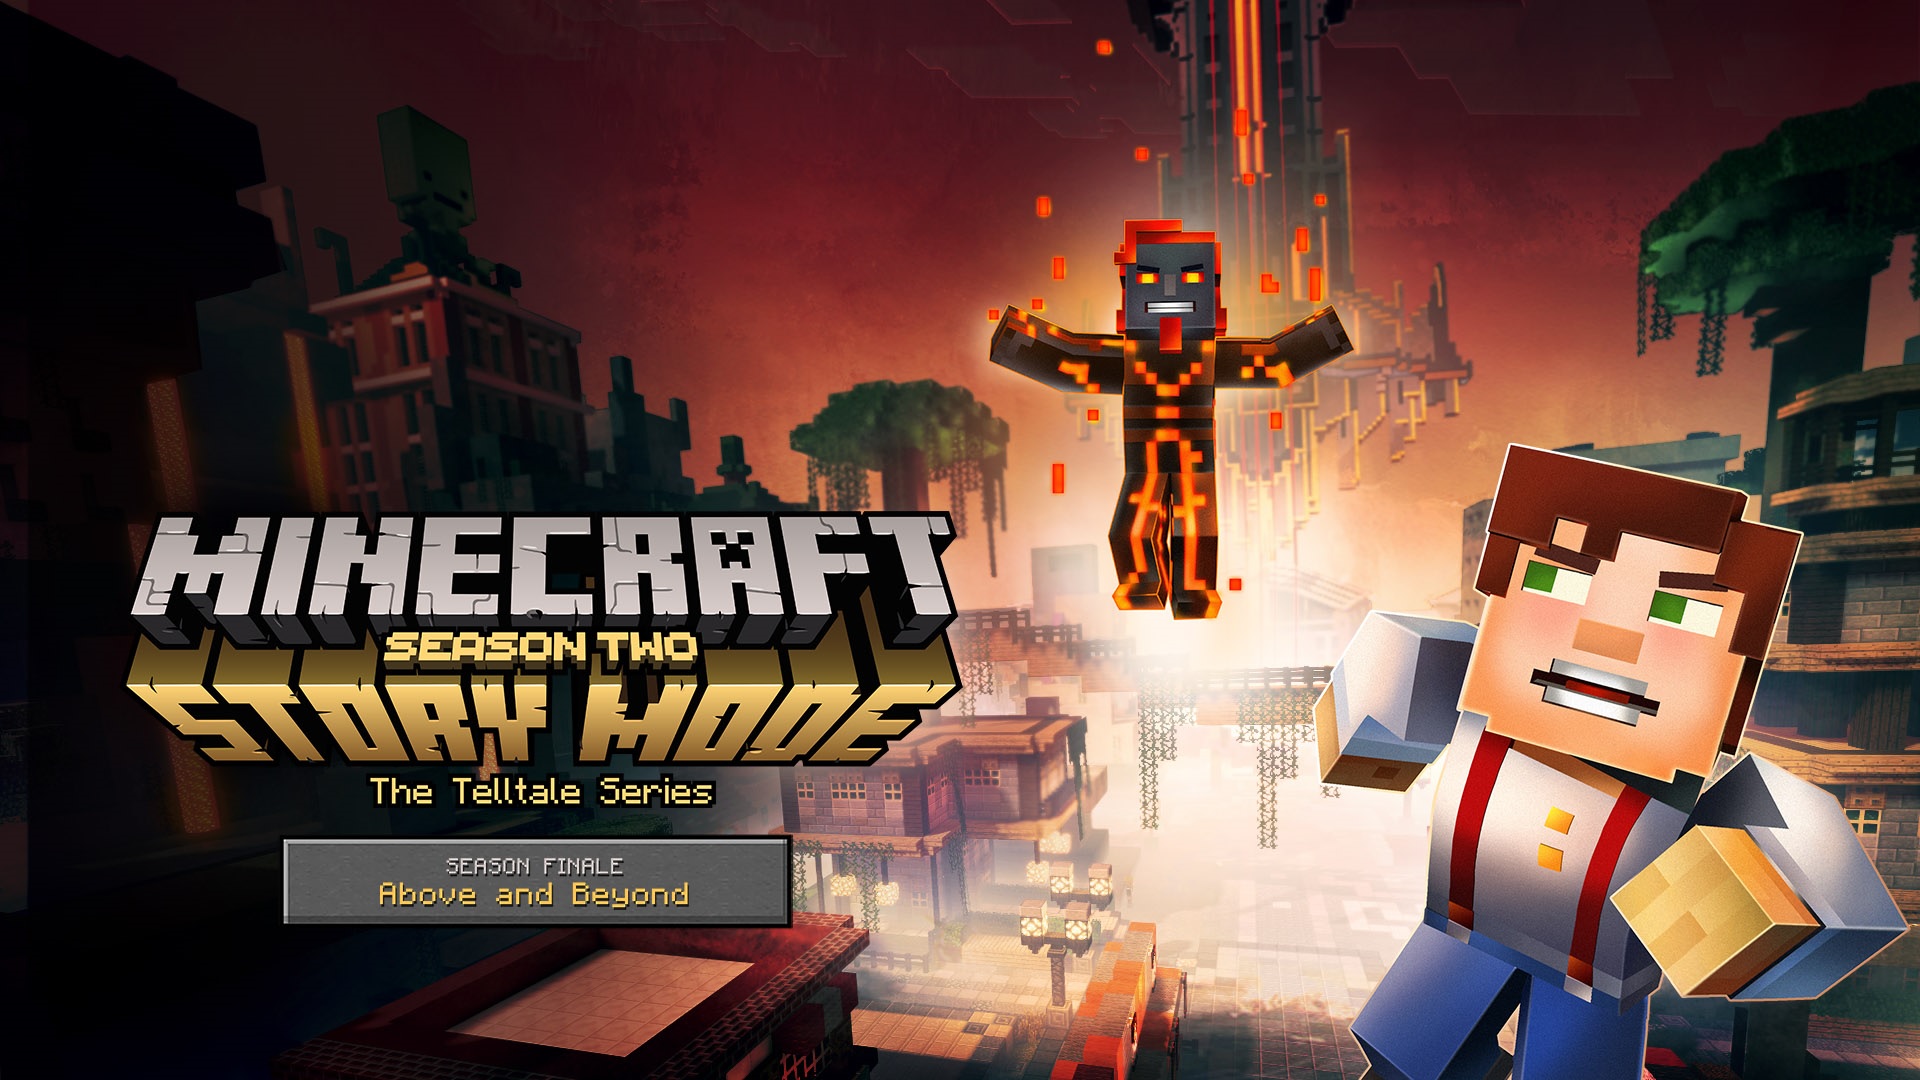 The Final Three Episodes Revealed for Minecraft: Story Mode